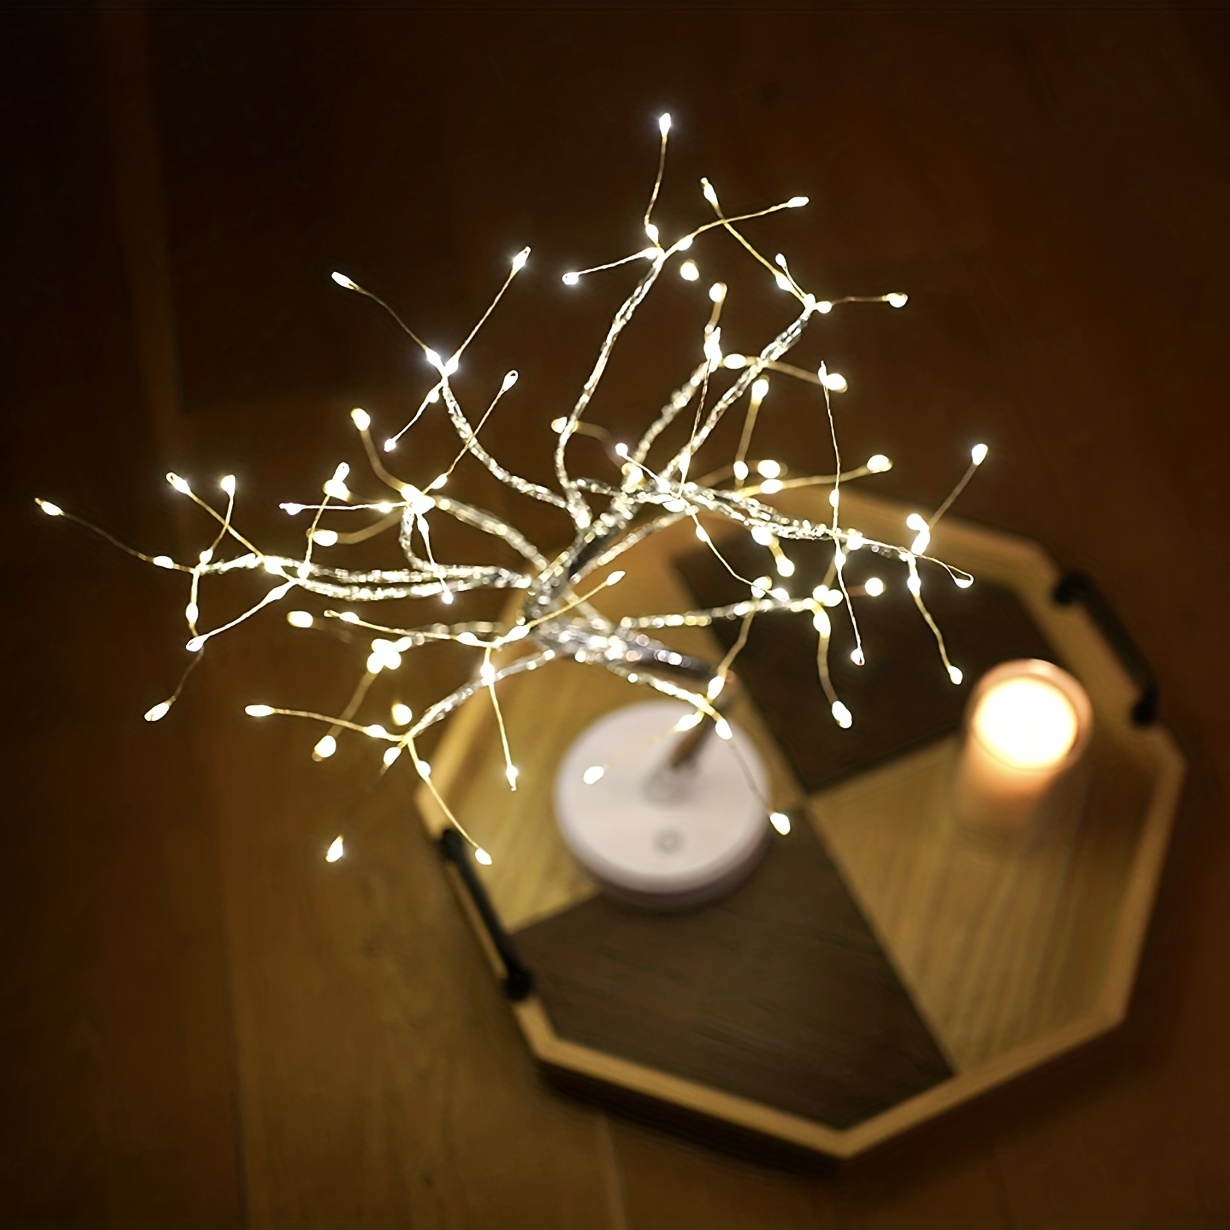  Led Tabletop Bonsai Tree Light 20 Inch LED Copper Wire  Christmas Night Light, Battery/USB Operated, 6h Timer Adjustable Branches,  for Home Decoration Light and Gift (4 Color) : Home & Kitchen